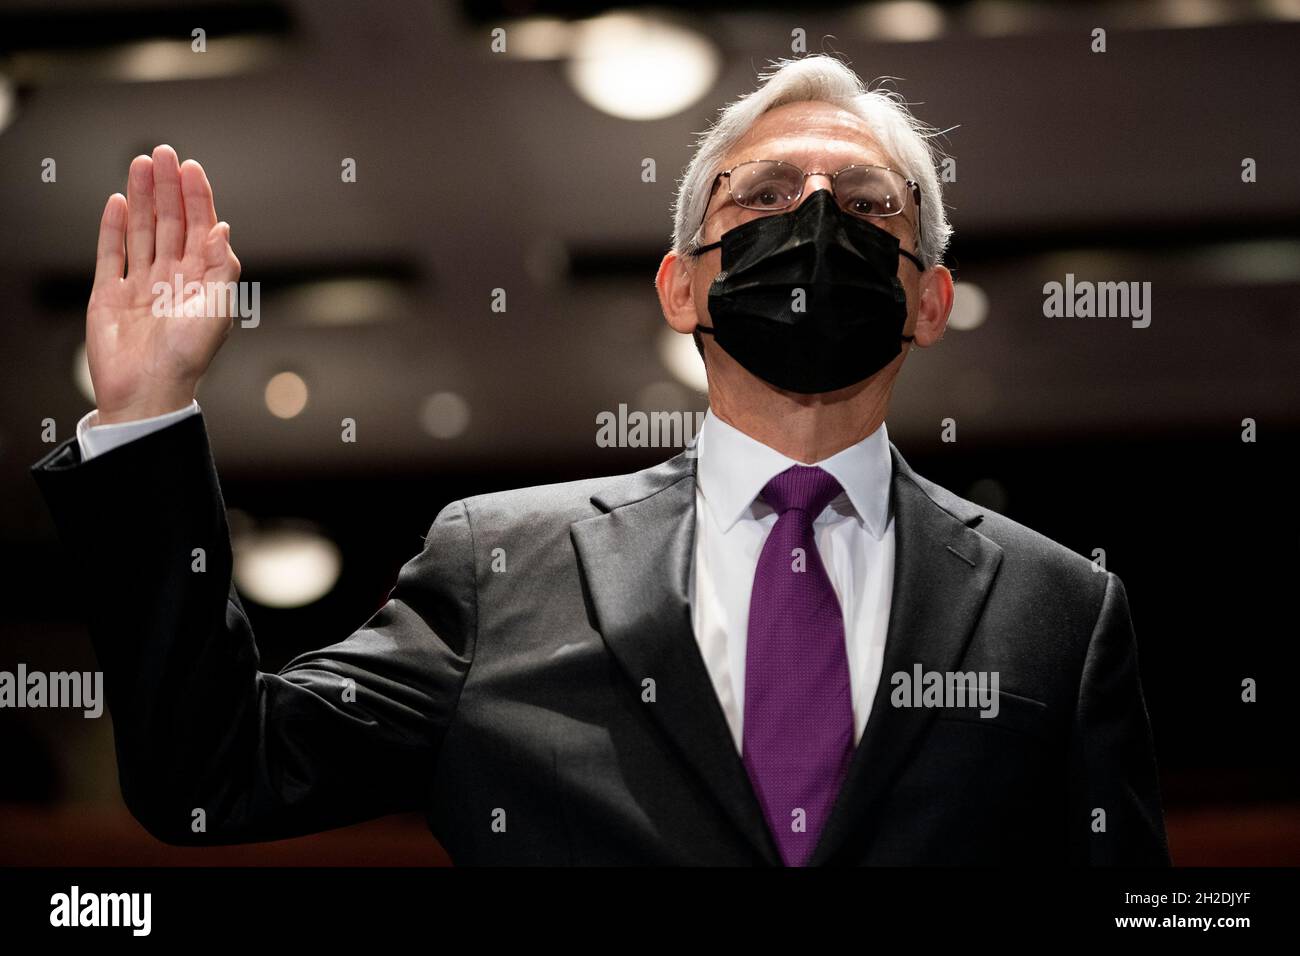 Attorney General Merrick Garland is sworn in during a House Judiciary Committee oversight hearing of the Department of Justice on Thursday, October 21, 2021 at Capitol Hill in Washington, DCCredit: Greg Nash/Pool via CNP /MediaPunch Stock Photo